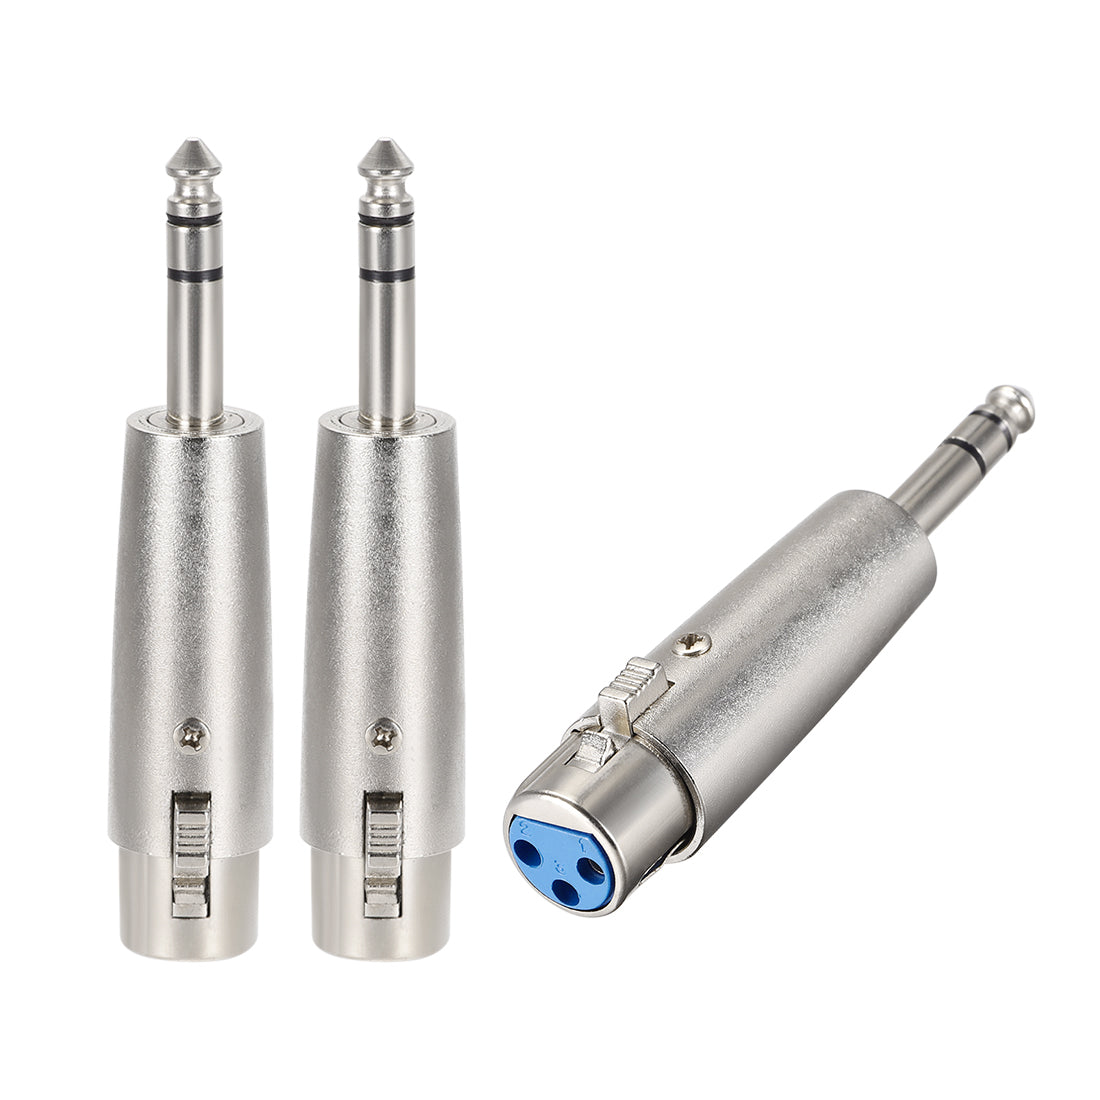 uxcell Uxcell XLR Female to 1/4" Male TRS Adapter,Gender Changer - XLR-F to 6.35mm Stereo Coupler	Adapters,Stereo Plug In Balanced Audio Connector,Mic Plug 3pcs